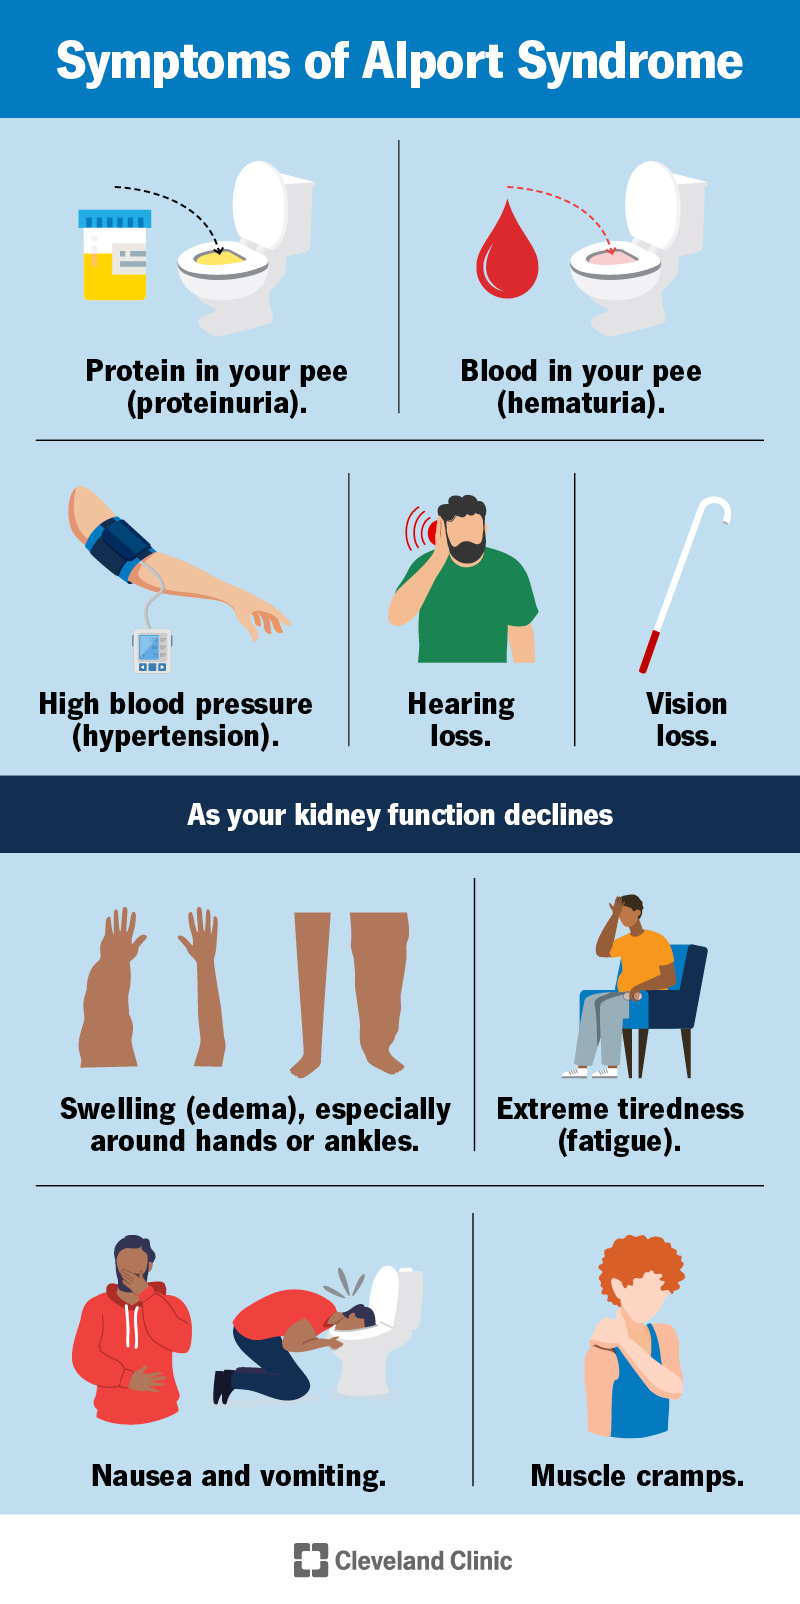 People with Alport syndrome commonly have symptoms that affect their pee, blood pressure, sight and hearing. As their kidneys get worse, they may develop swelling and other symptoms.